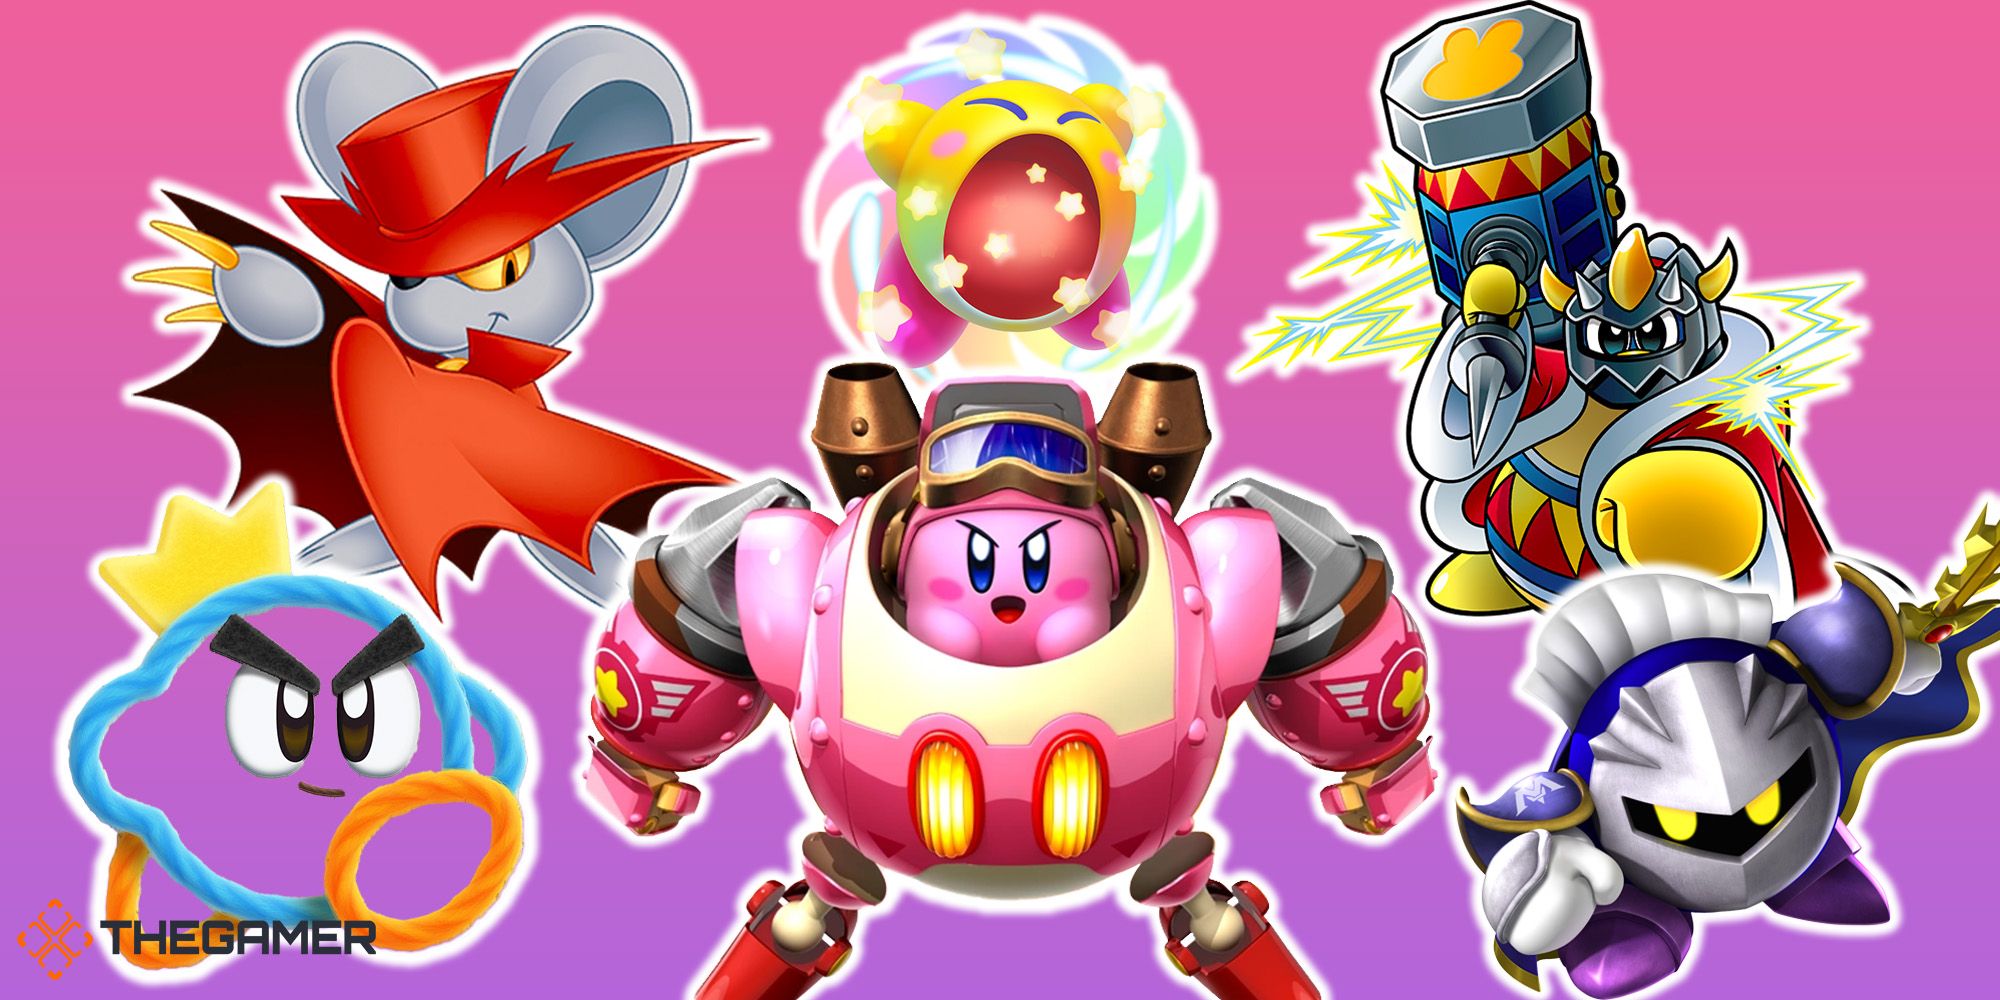 Split image of Kirby, Meta Knight, Prince Fluff, and other Kirby characters